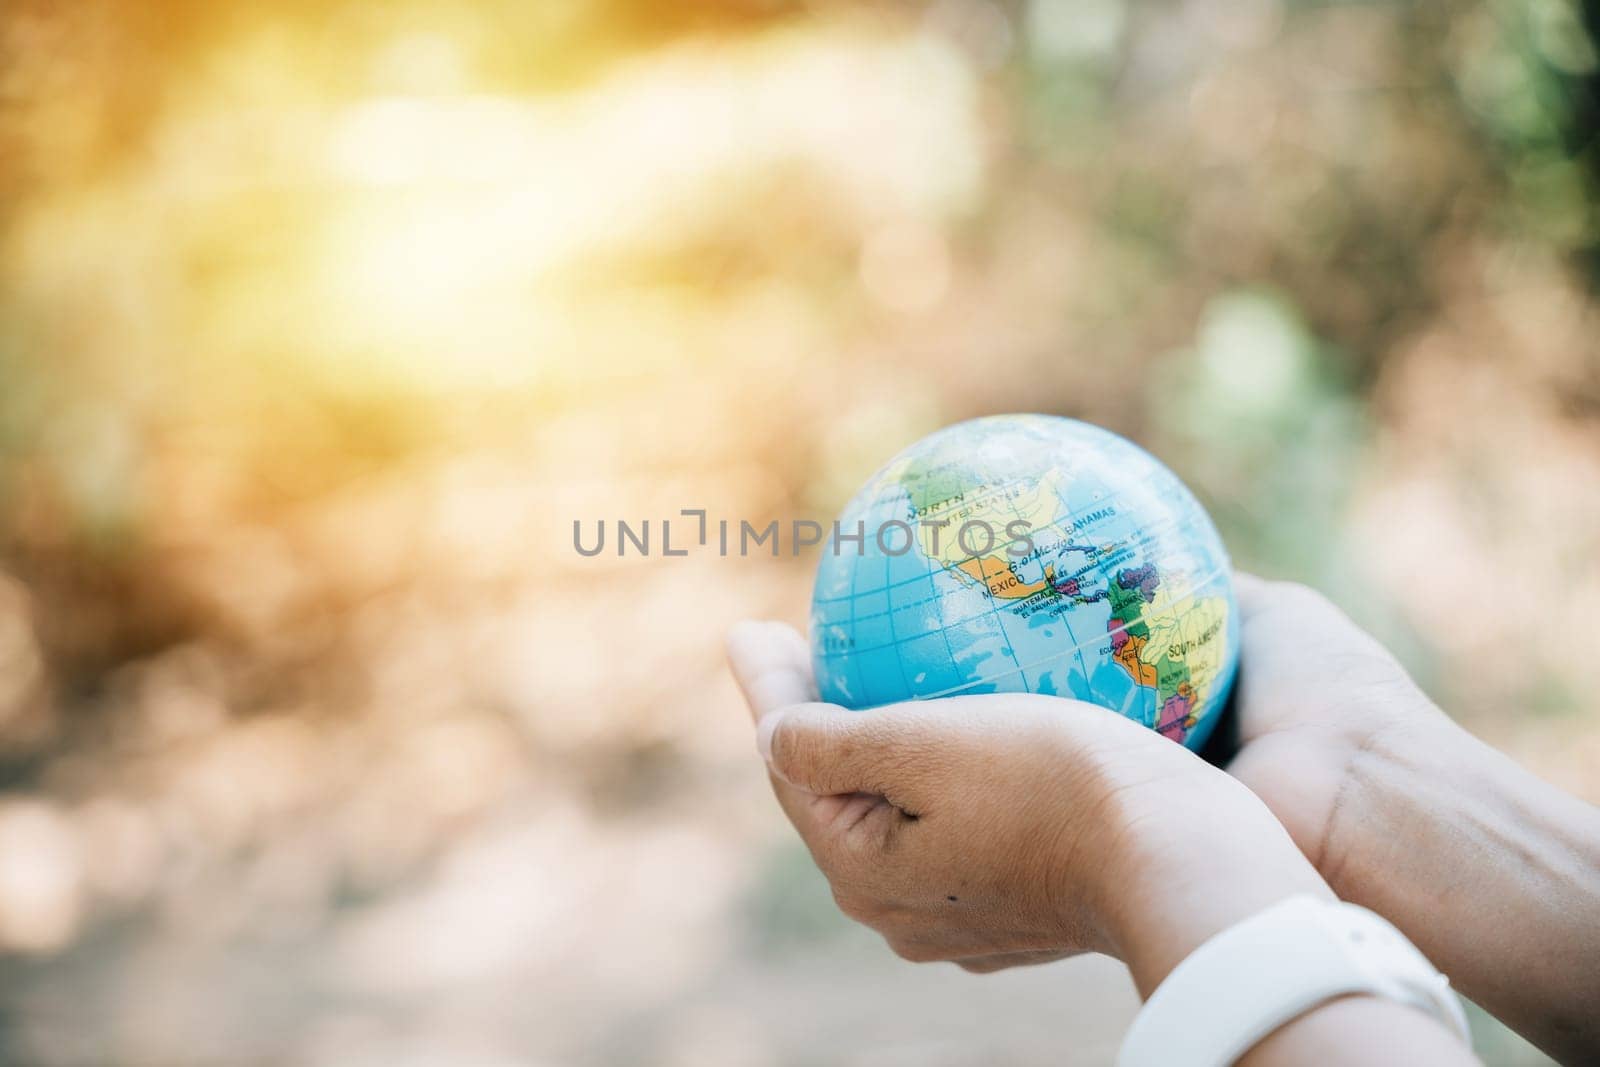 In the spirit of World Earth Day, embrace a green leaf and the globe to represent Green Energy, ESG, and Environmental Responsibility. Signify support and wisdom in caring for our planet.